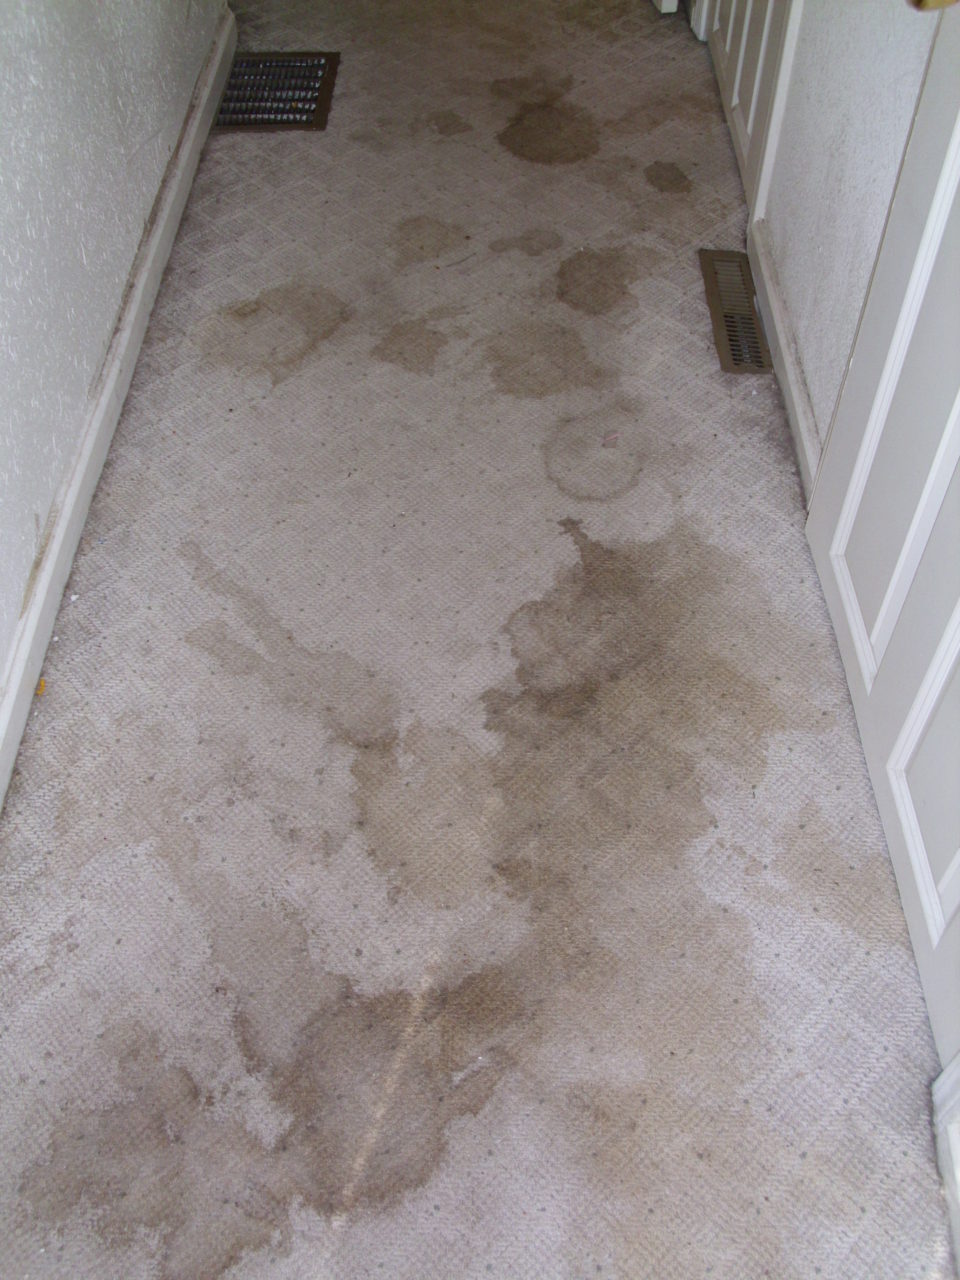 hallway with grungy stained carpet Before & after photos